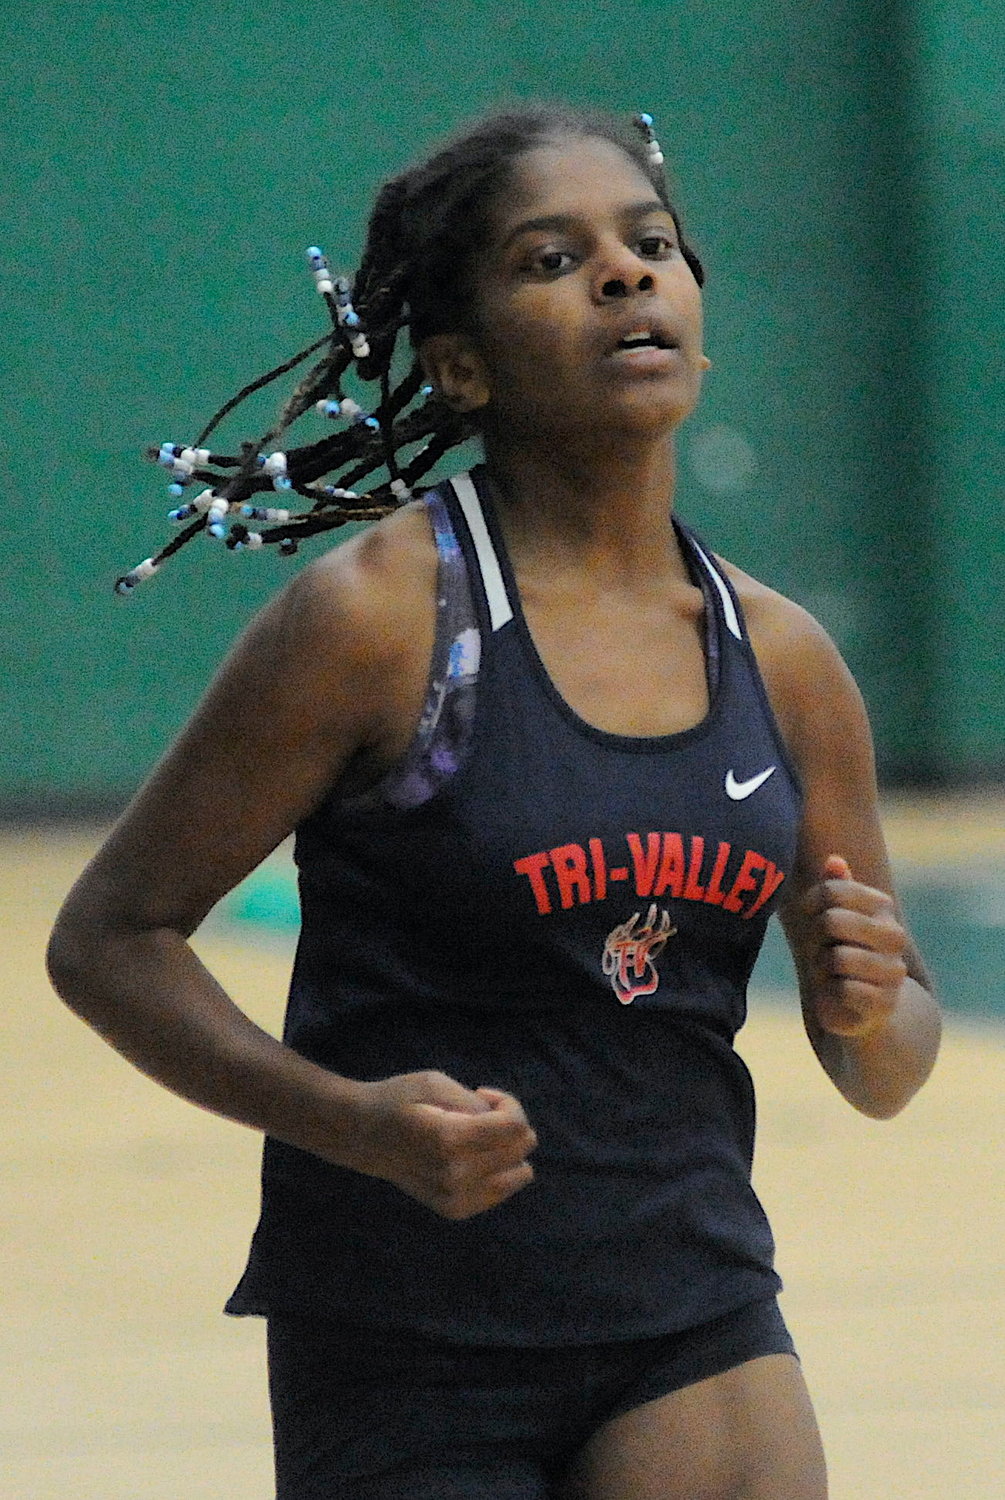 Tri-Valley’s Tabitha Mulholland, a 10th grader who competes in sprint events.